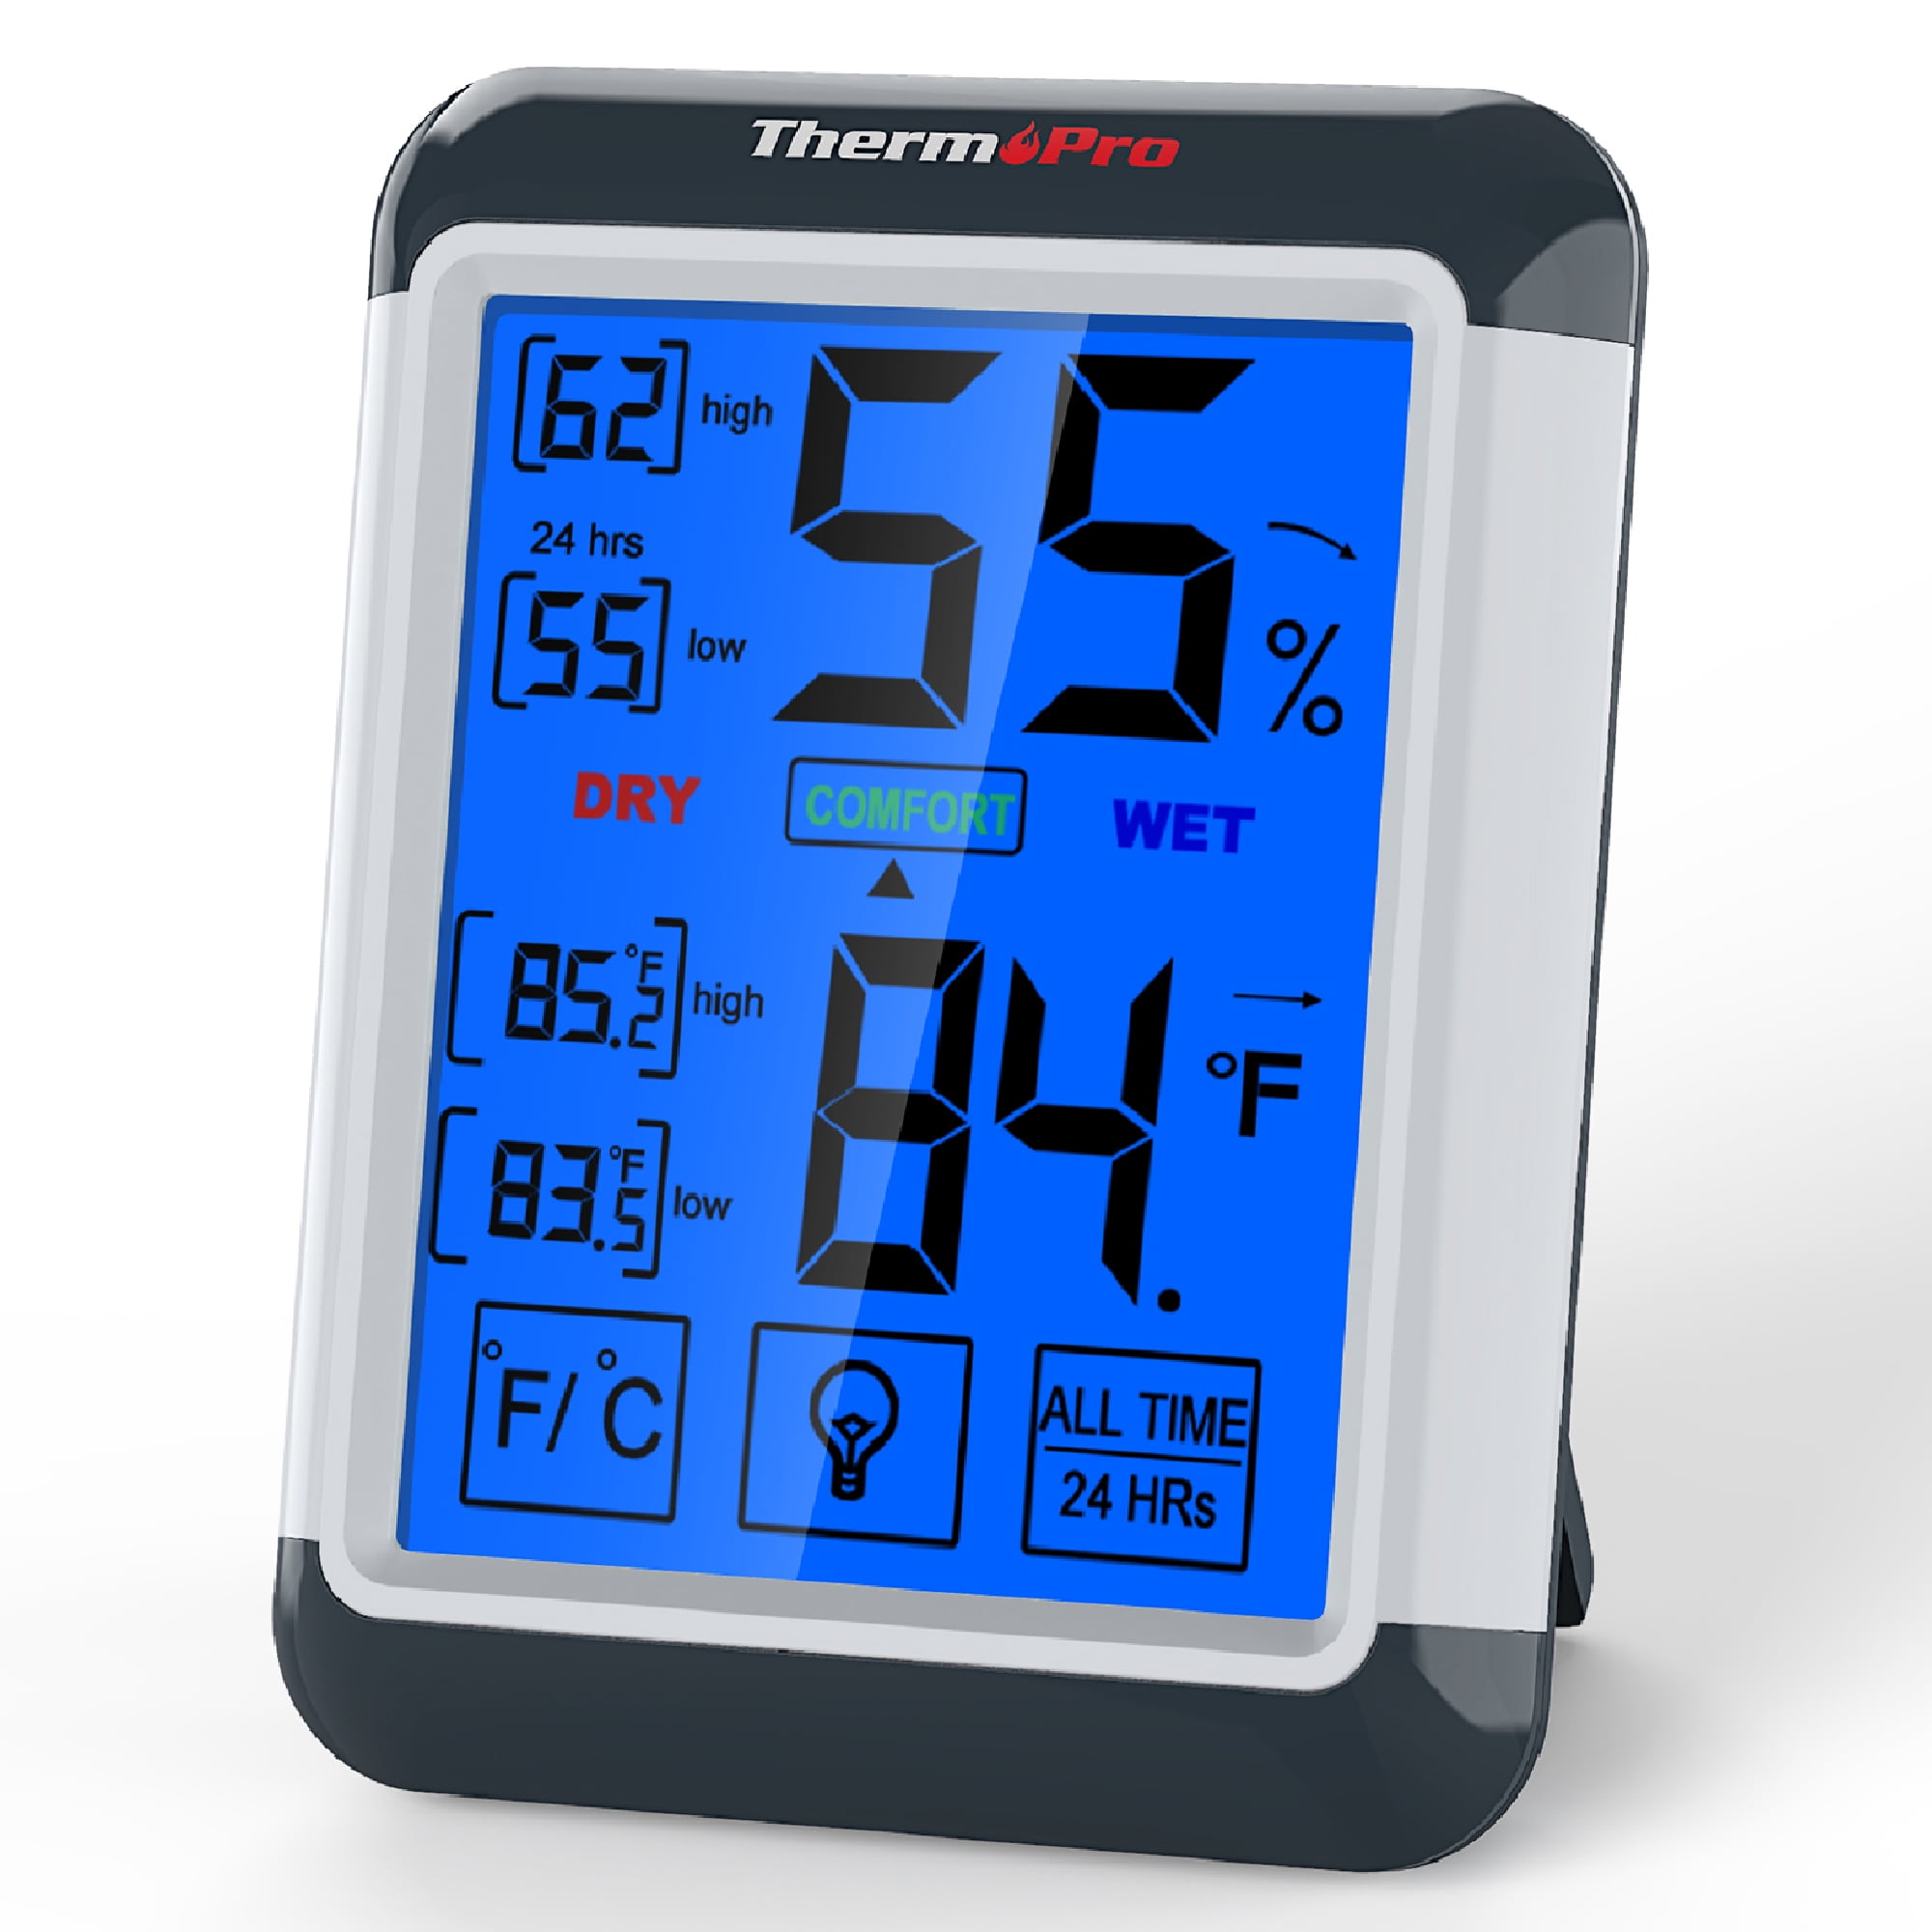 Digital Hygrometer/Thermometer Comboinstruments HTC1